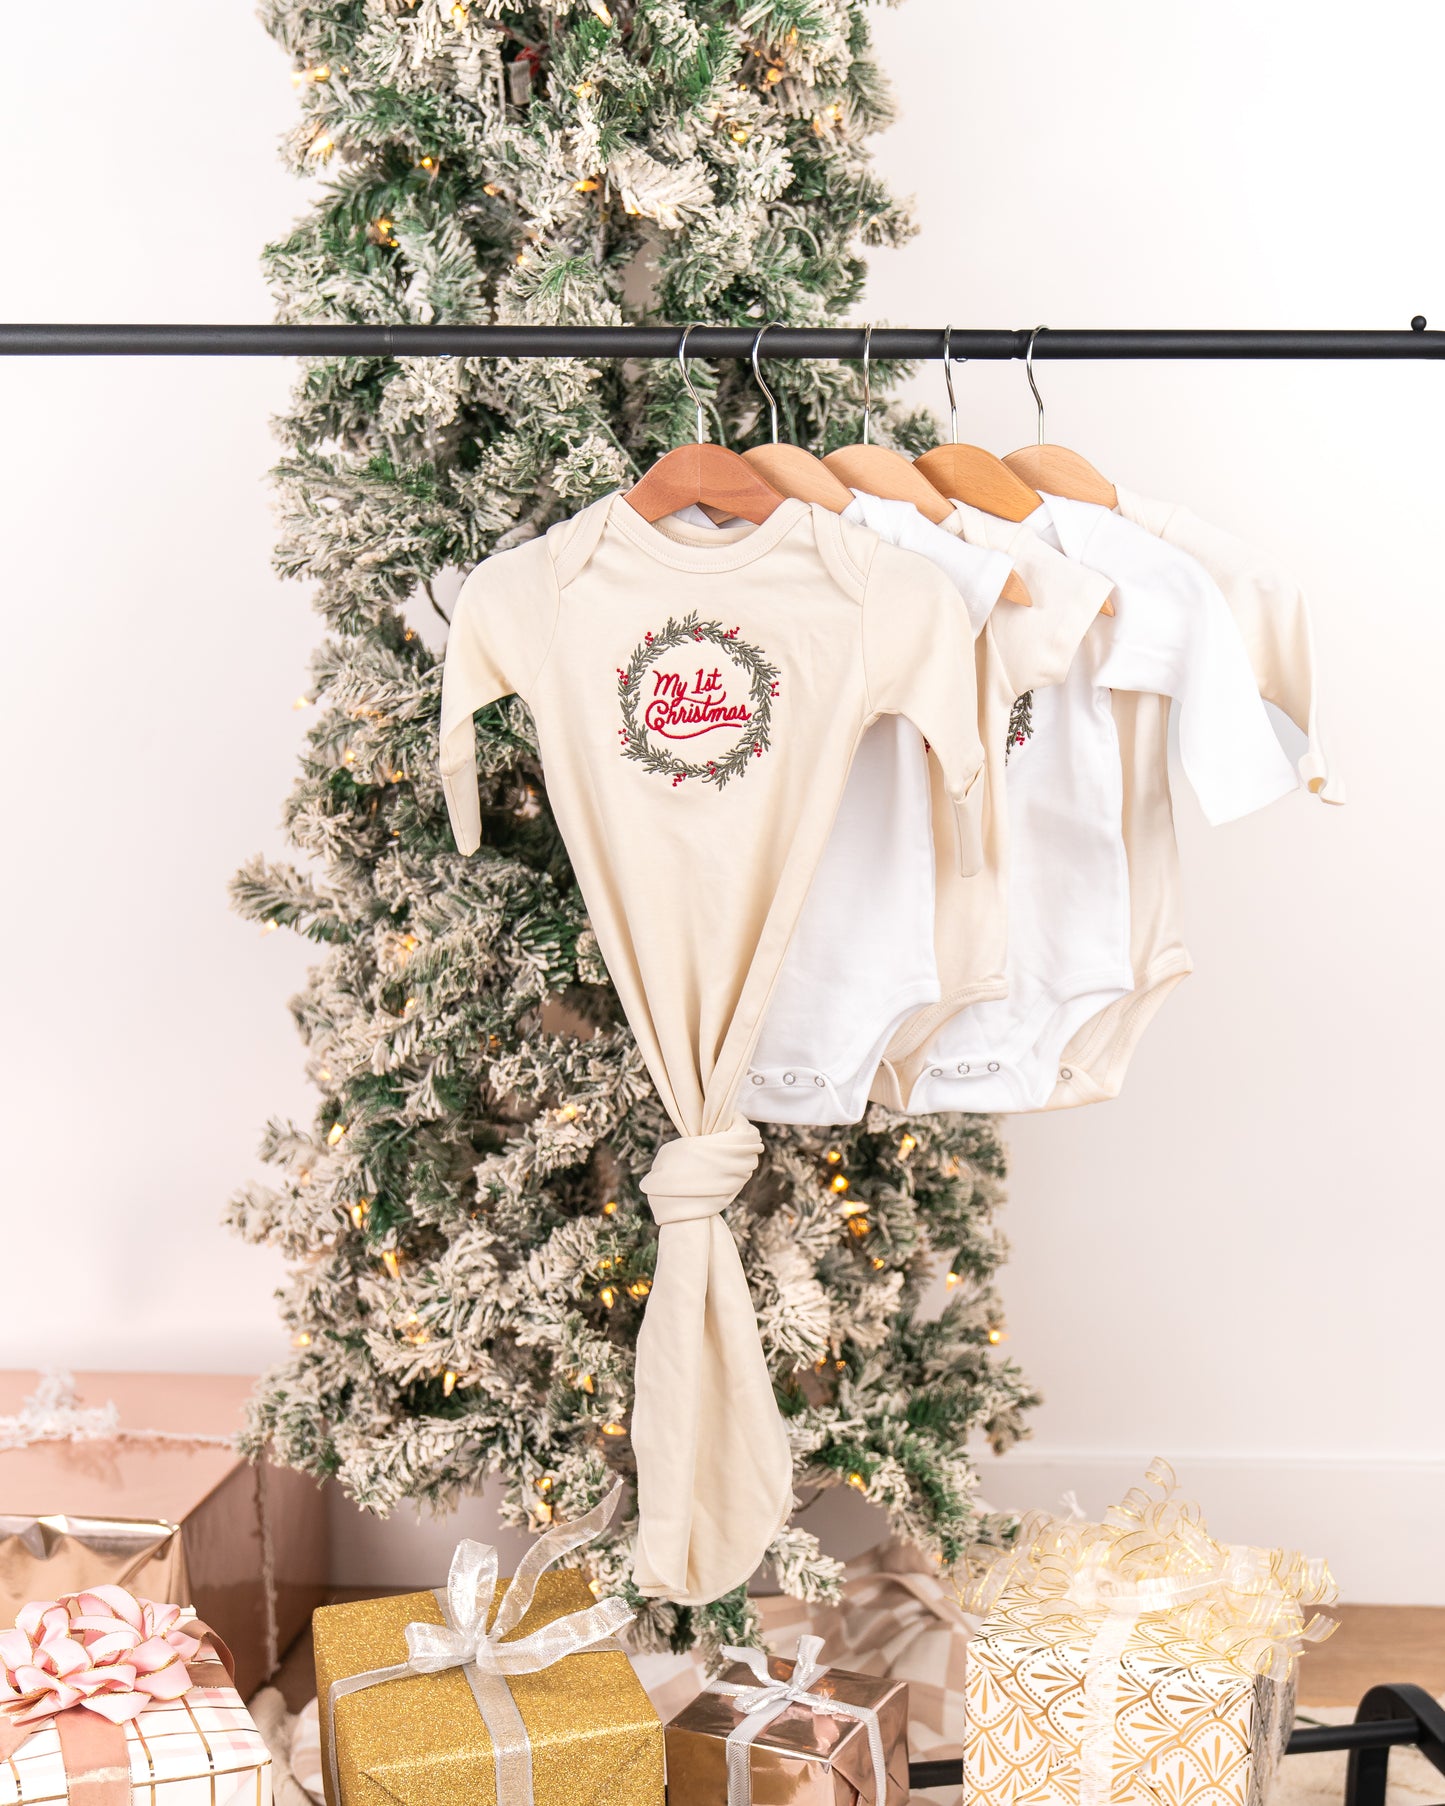 My First Christmas - Embroidered Bodysuit (White, Short Sleeve)